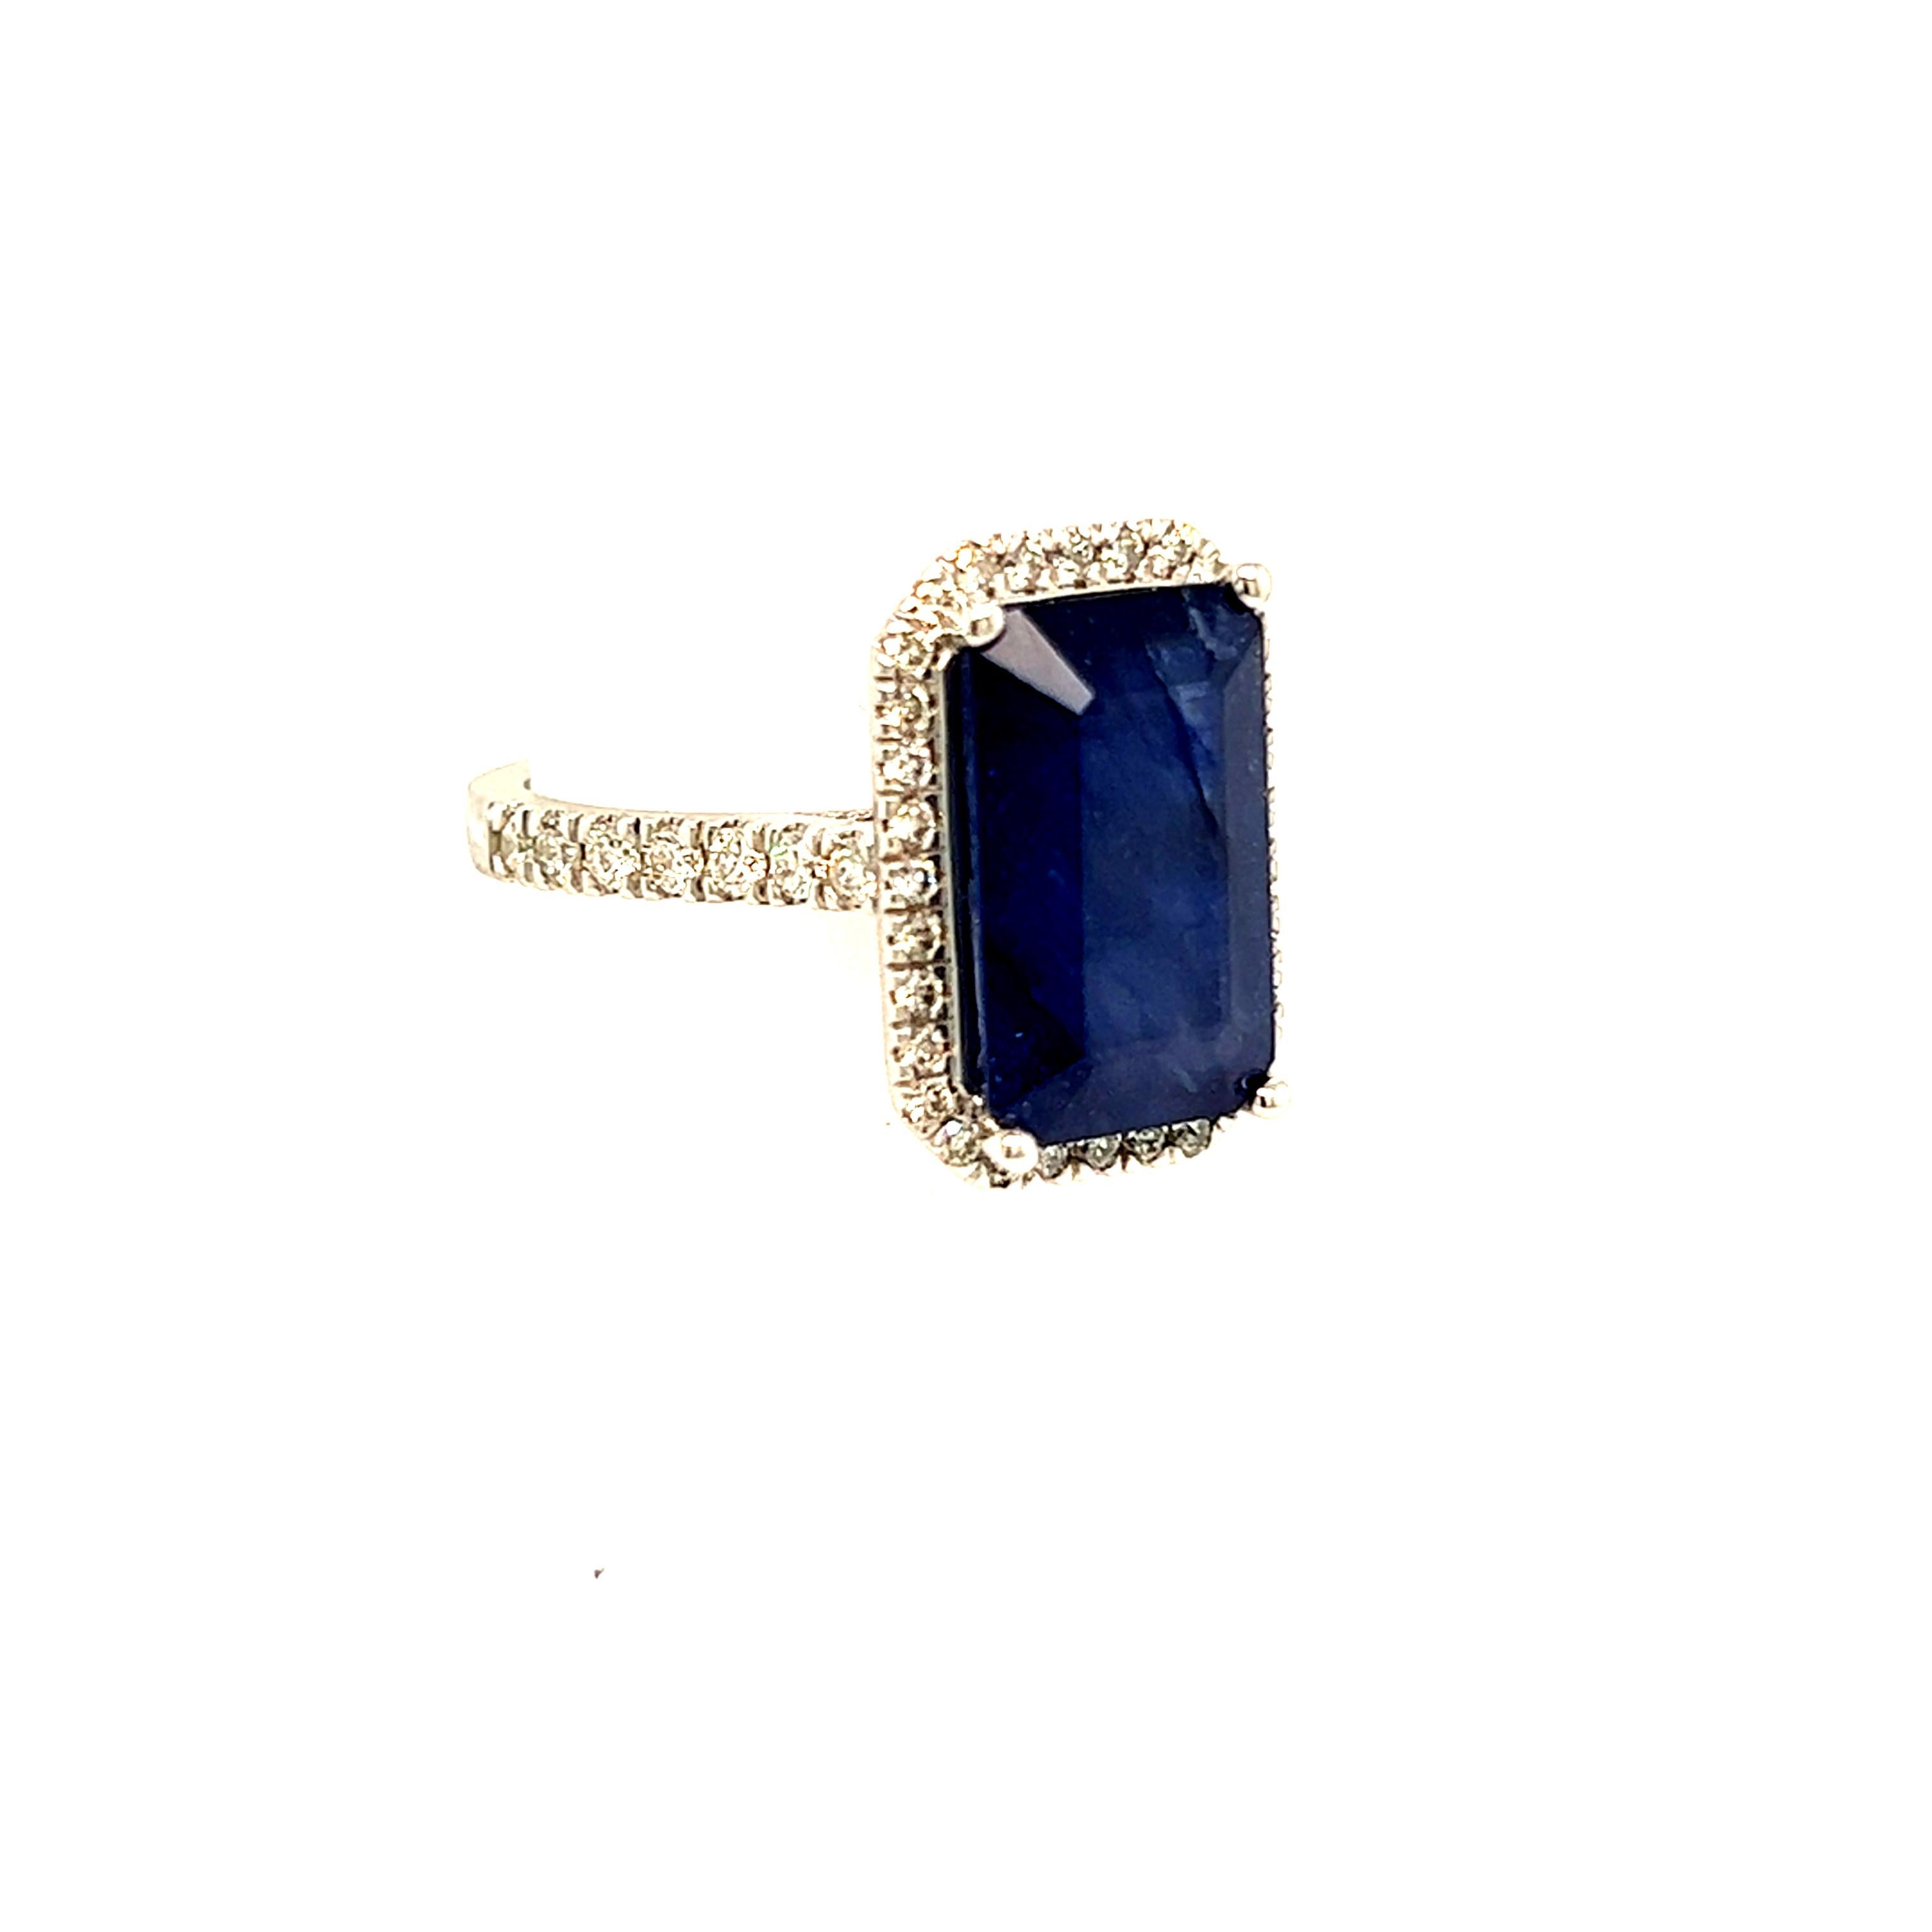 Sapphire Diamond Ring Size 6.25 14k Gold 6.84 TCW Certified For Sale 3